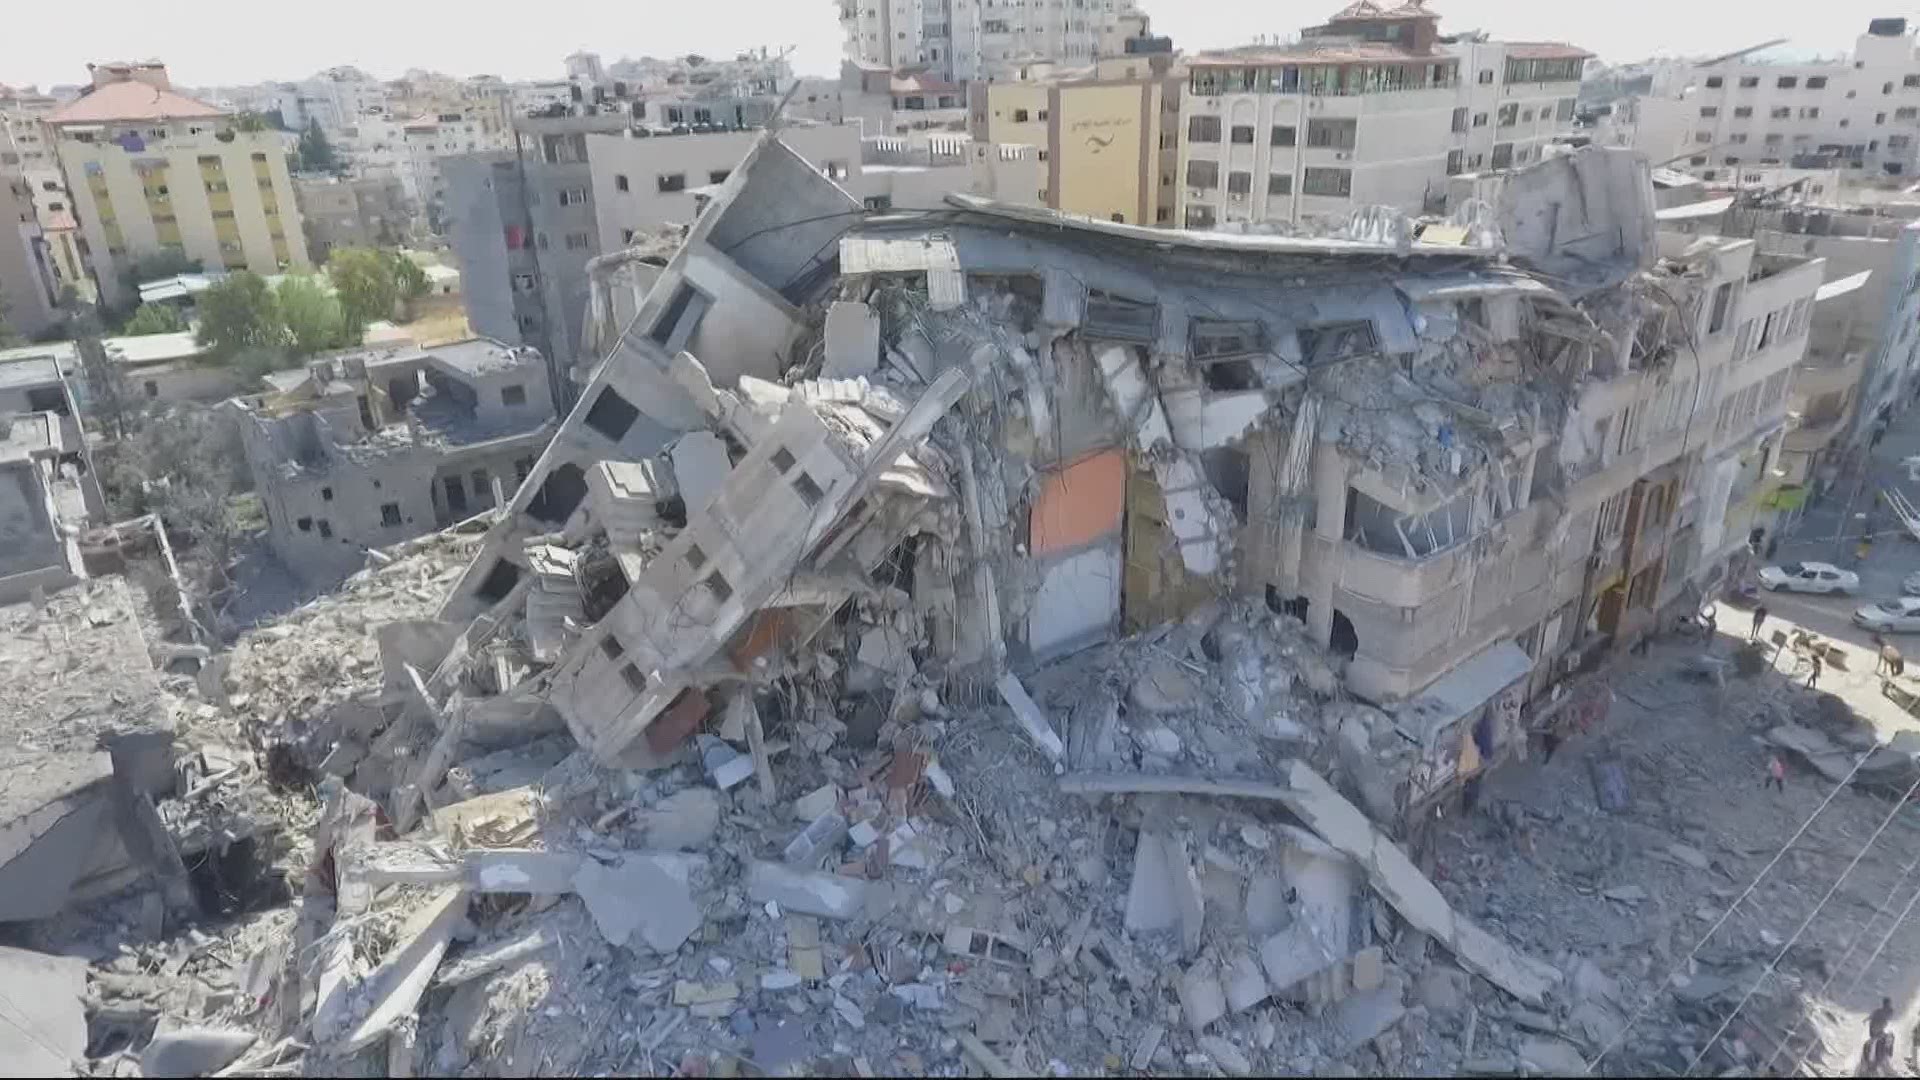 Over 200 Palestinians were killed in the conflict and 13 Israelis died; 8,000 homes were damaged or destroyed and 150 buildings were knocked down.